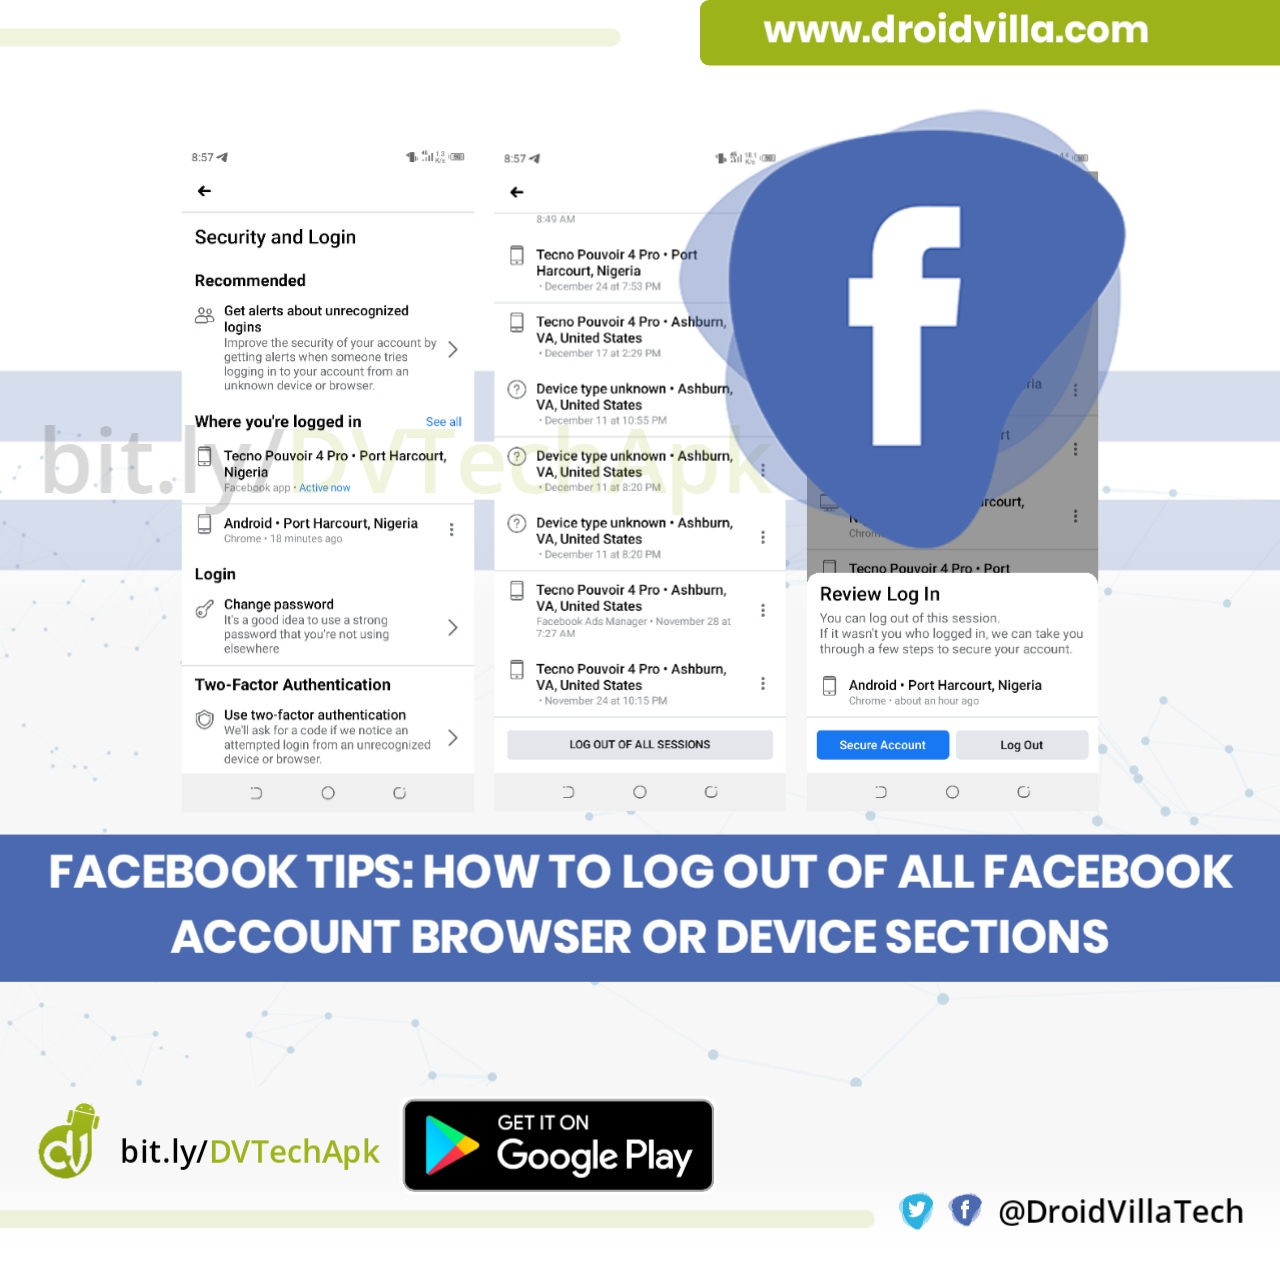 facebook-tips-how-to-log-out-of-all-facebook-account-browser-or-device-sections-droidvilla-technology-solution-android-apk-phone-reviews-technology-updates-tipstricks